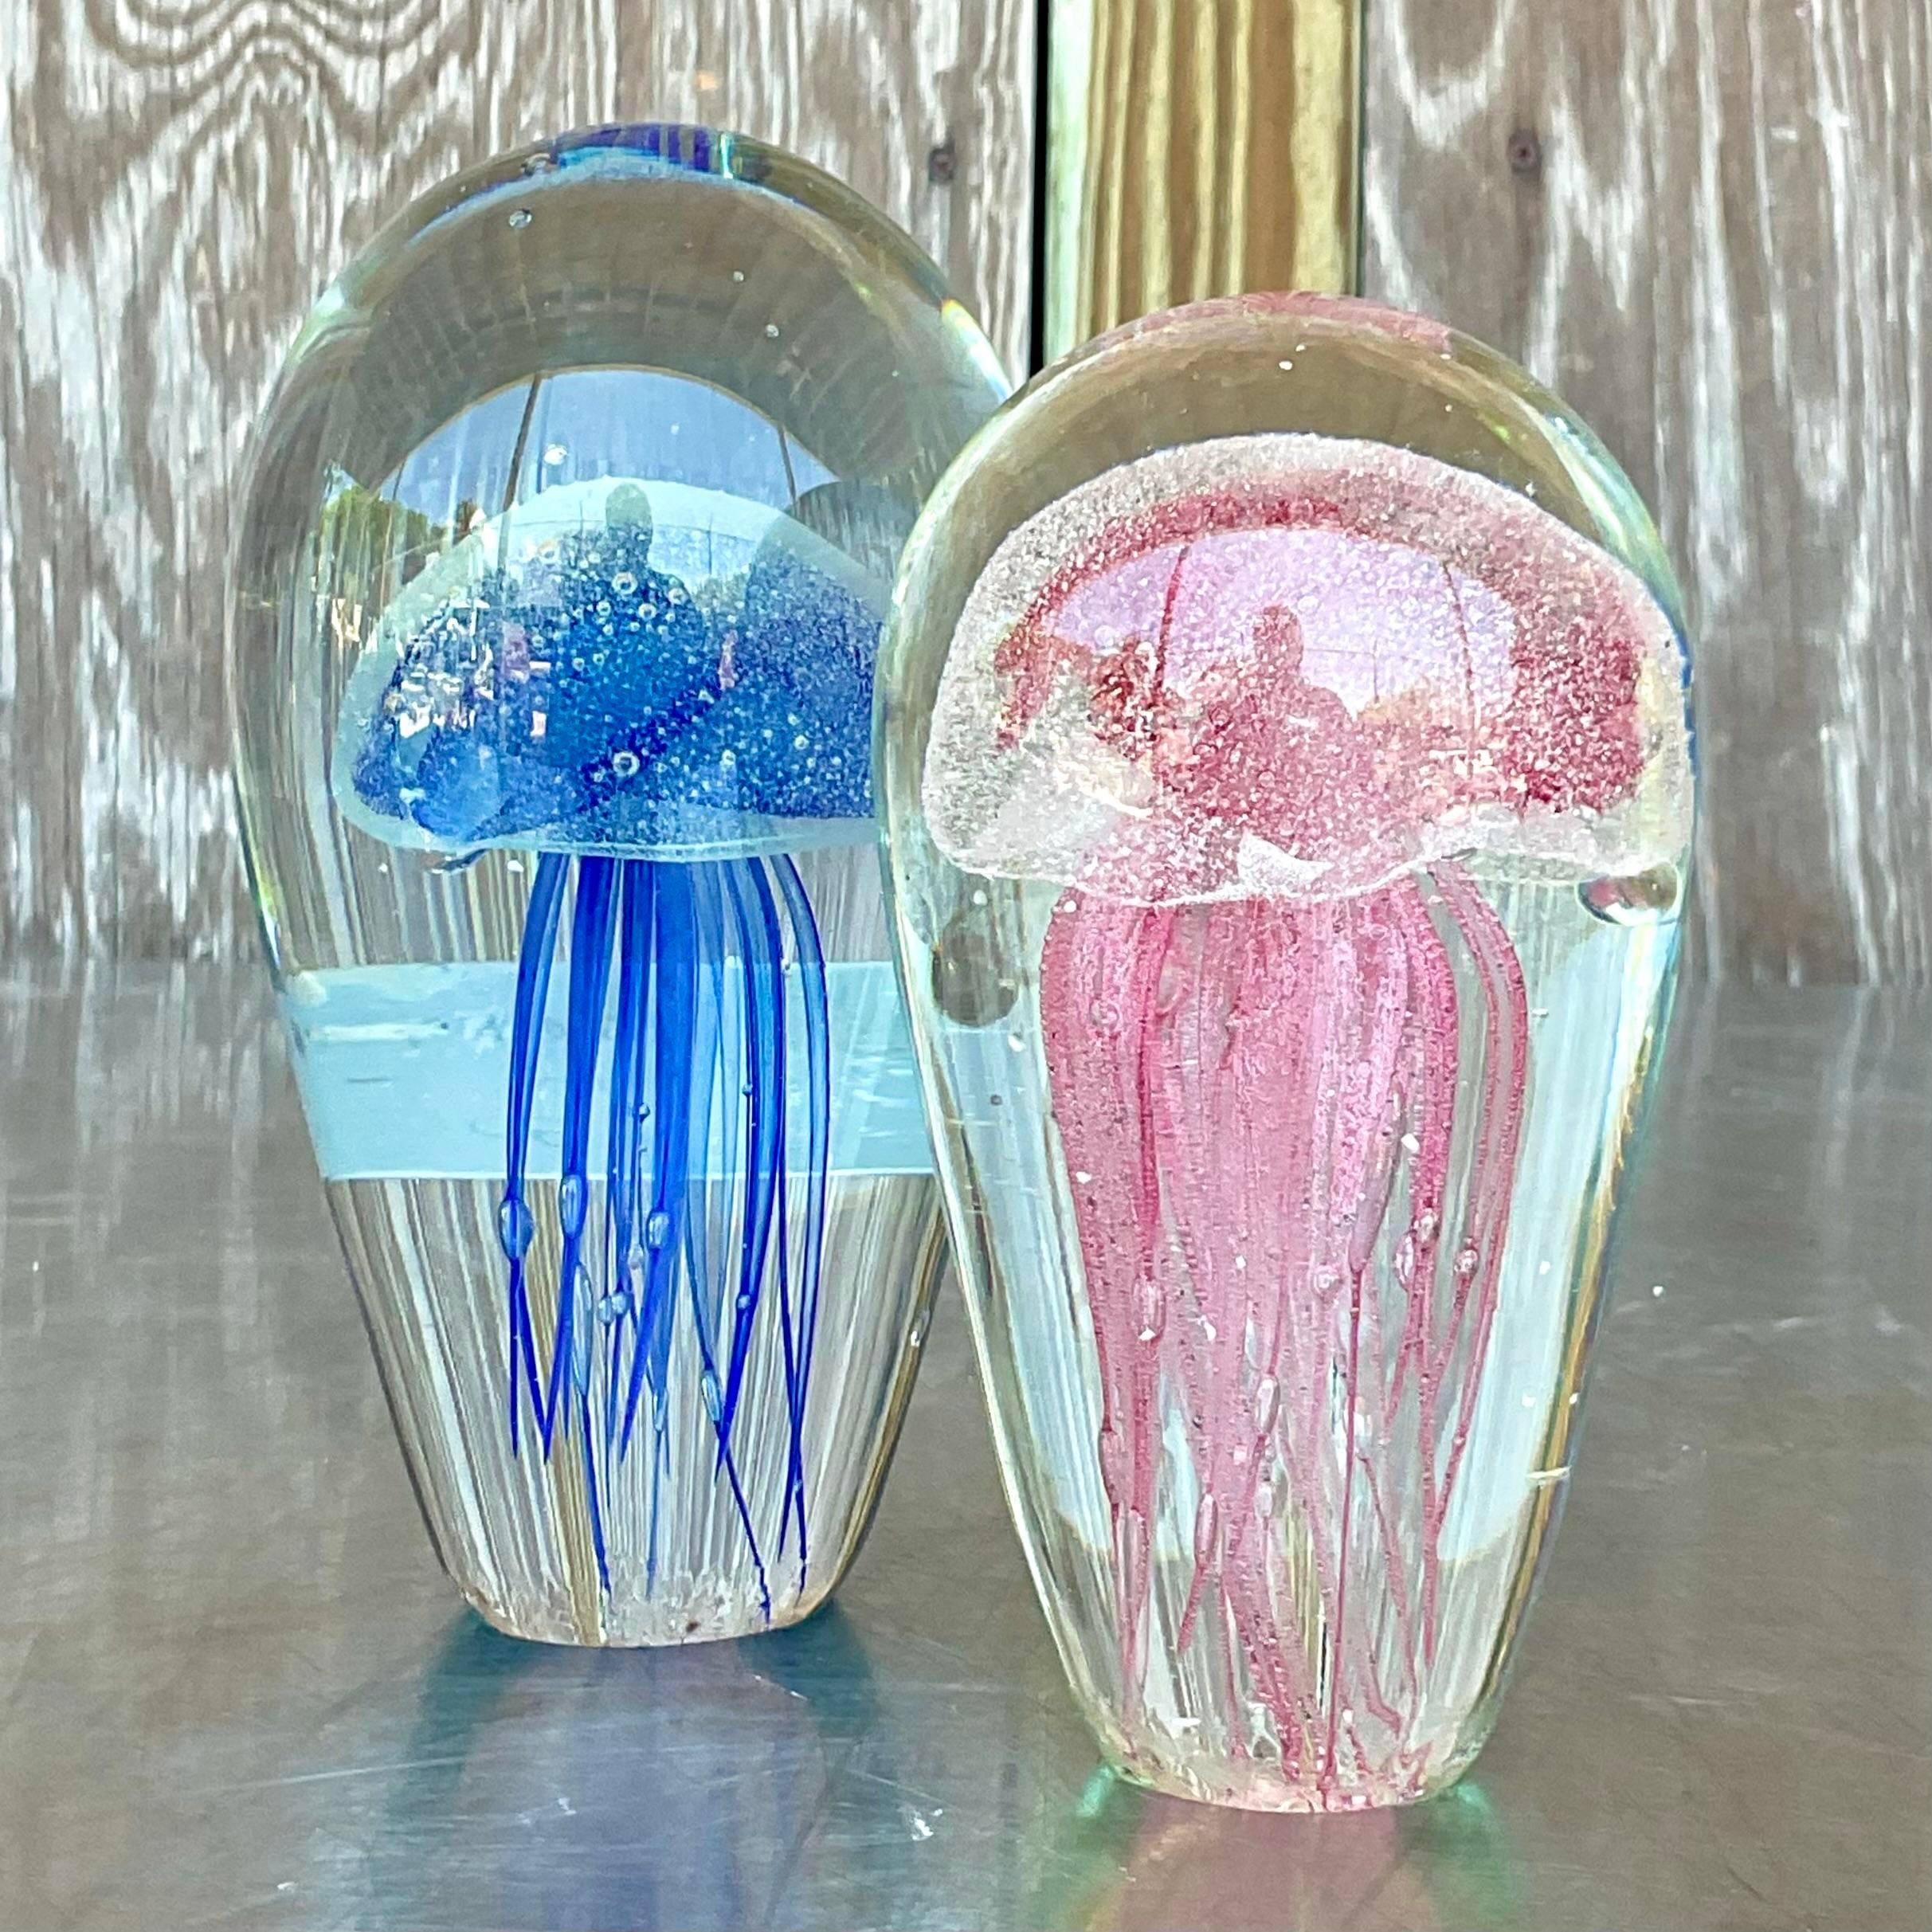 Transatlantic Wonder: The Vintage Boho Italian Glass Jellyfish, reminiscent of Murano's artisanal tradition, merges Italian craftsmanship with American creativity. This set of two ethereal pieces embodies the spirit of coastal charm and artistic